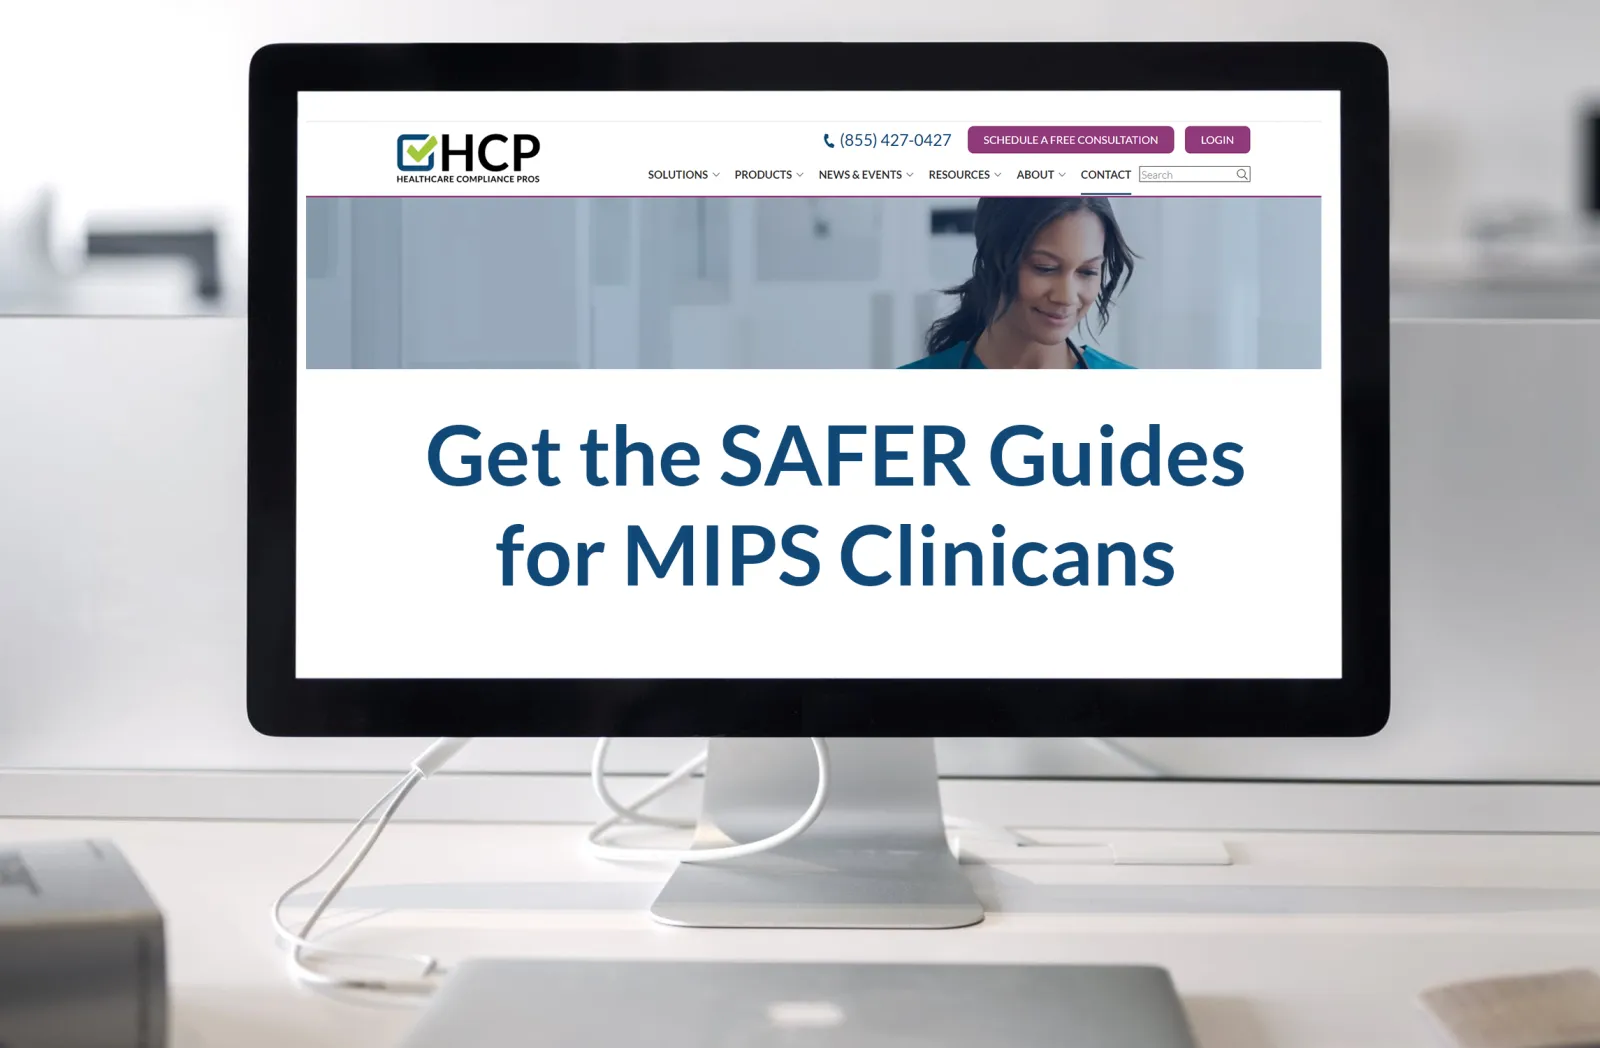 a monitor screen displays &quot;Get the SAFER Guides for MIPS Clinicians&quot;